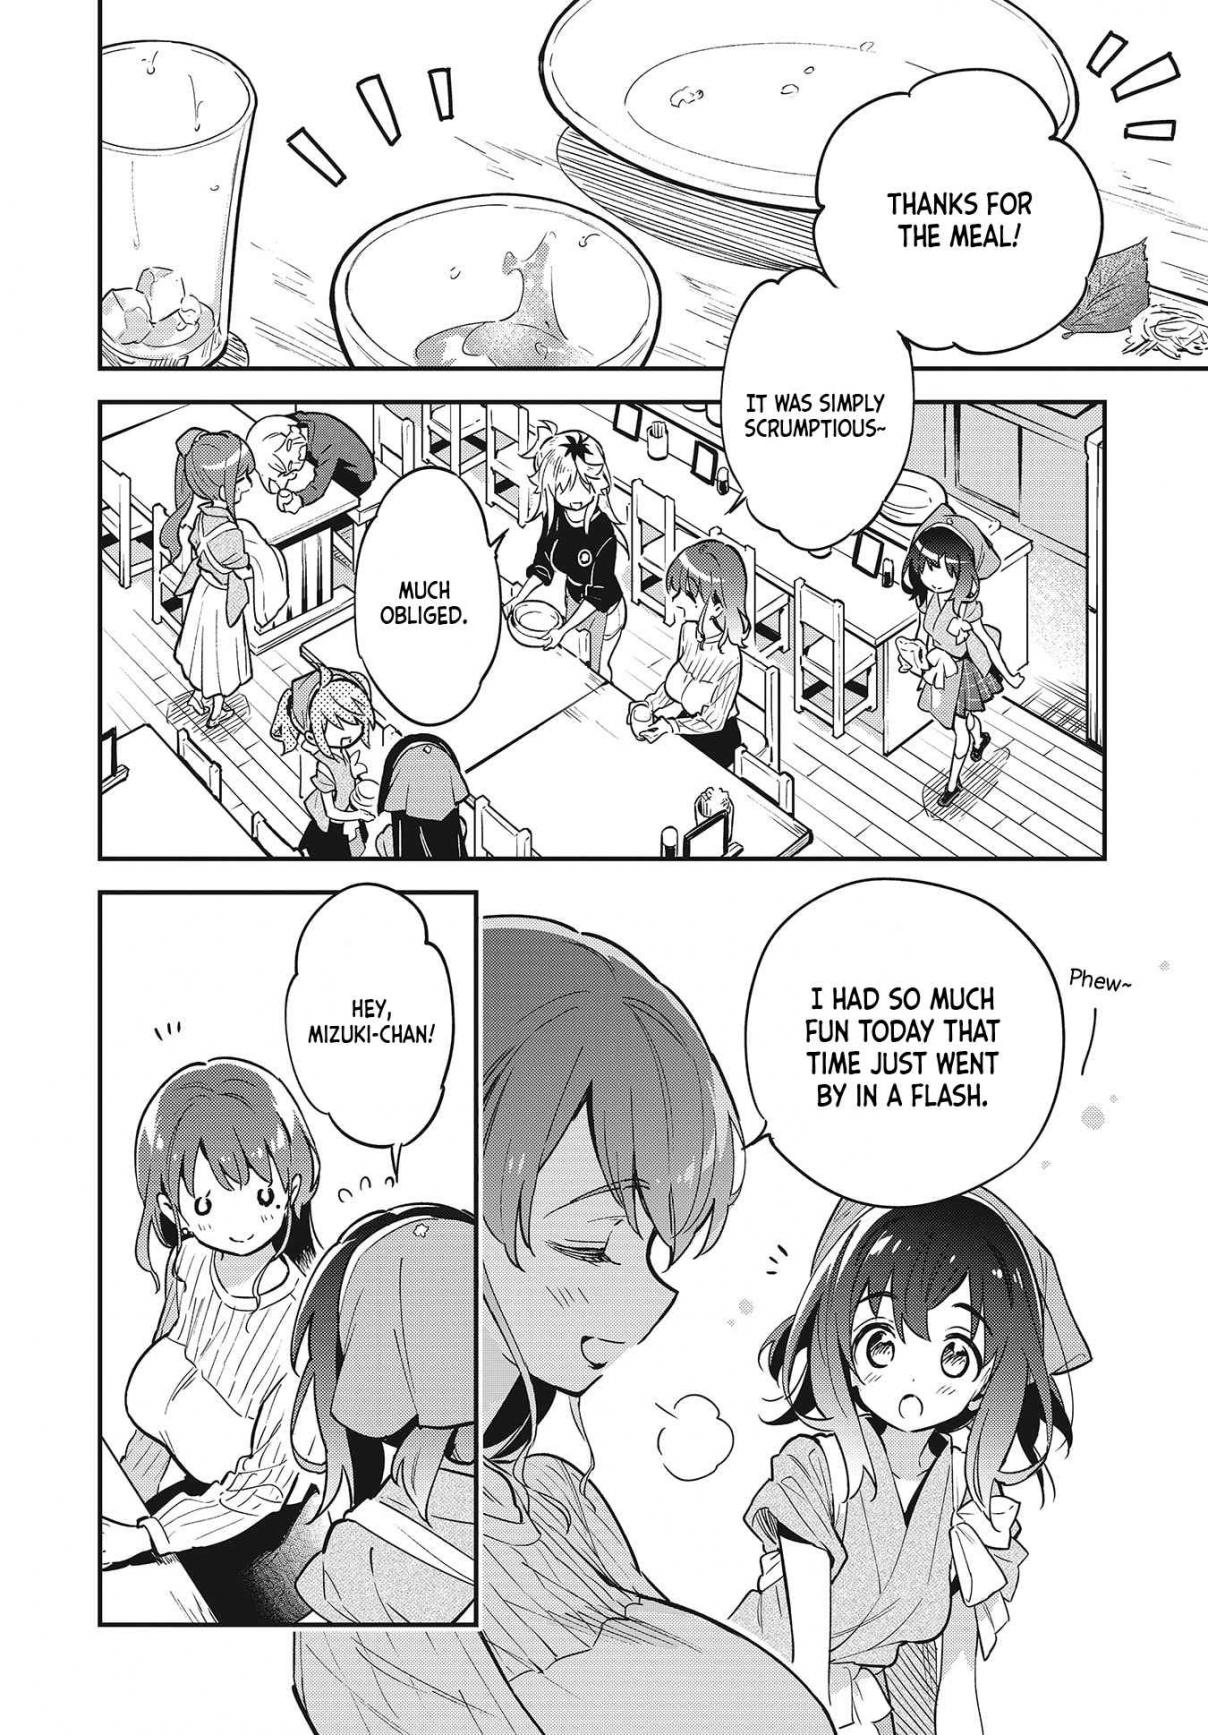 Chotto Ippai! Vol. 6 Ch. 39 The way, the road